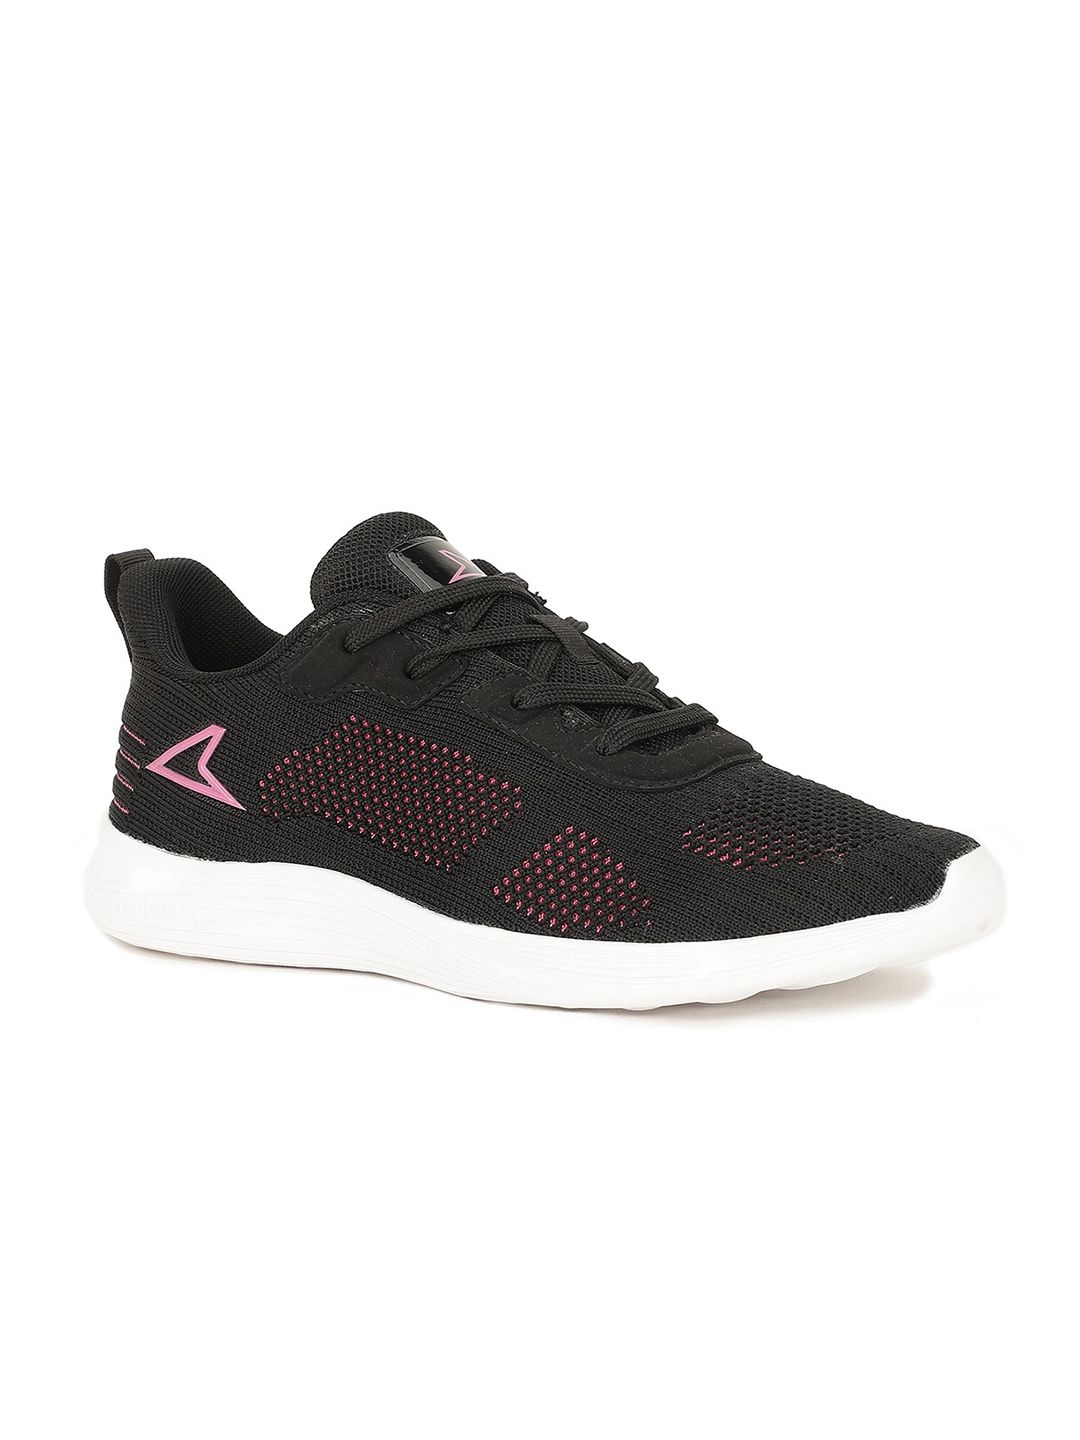 Power Women Black Textile Running Non-Marking Shoes Price in India